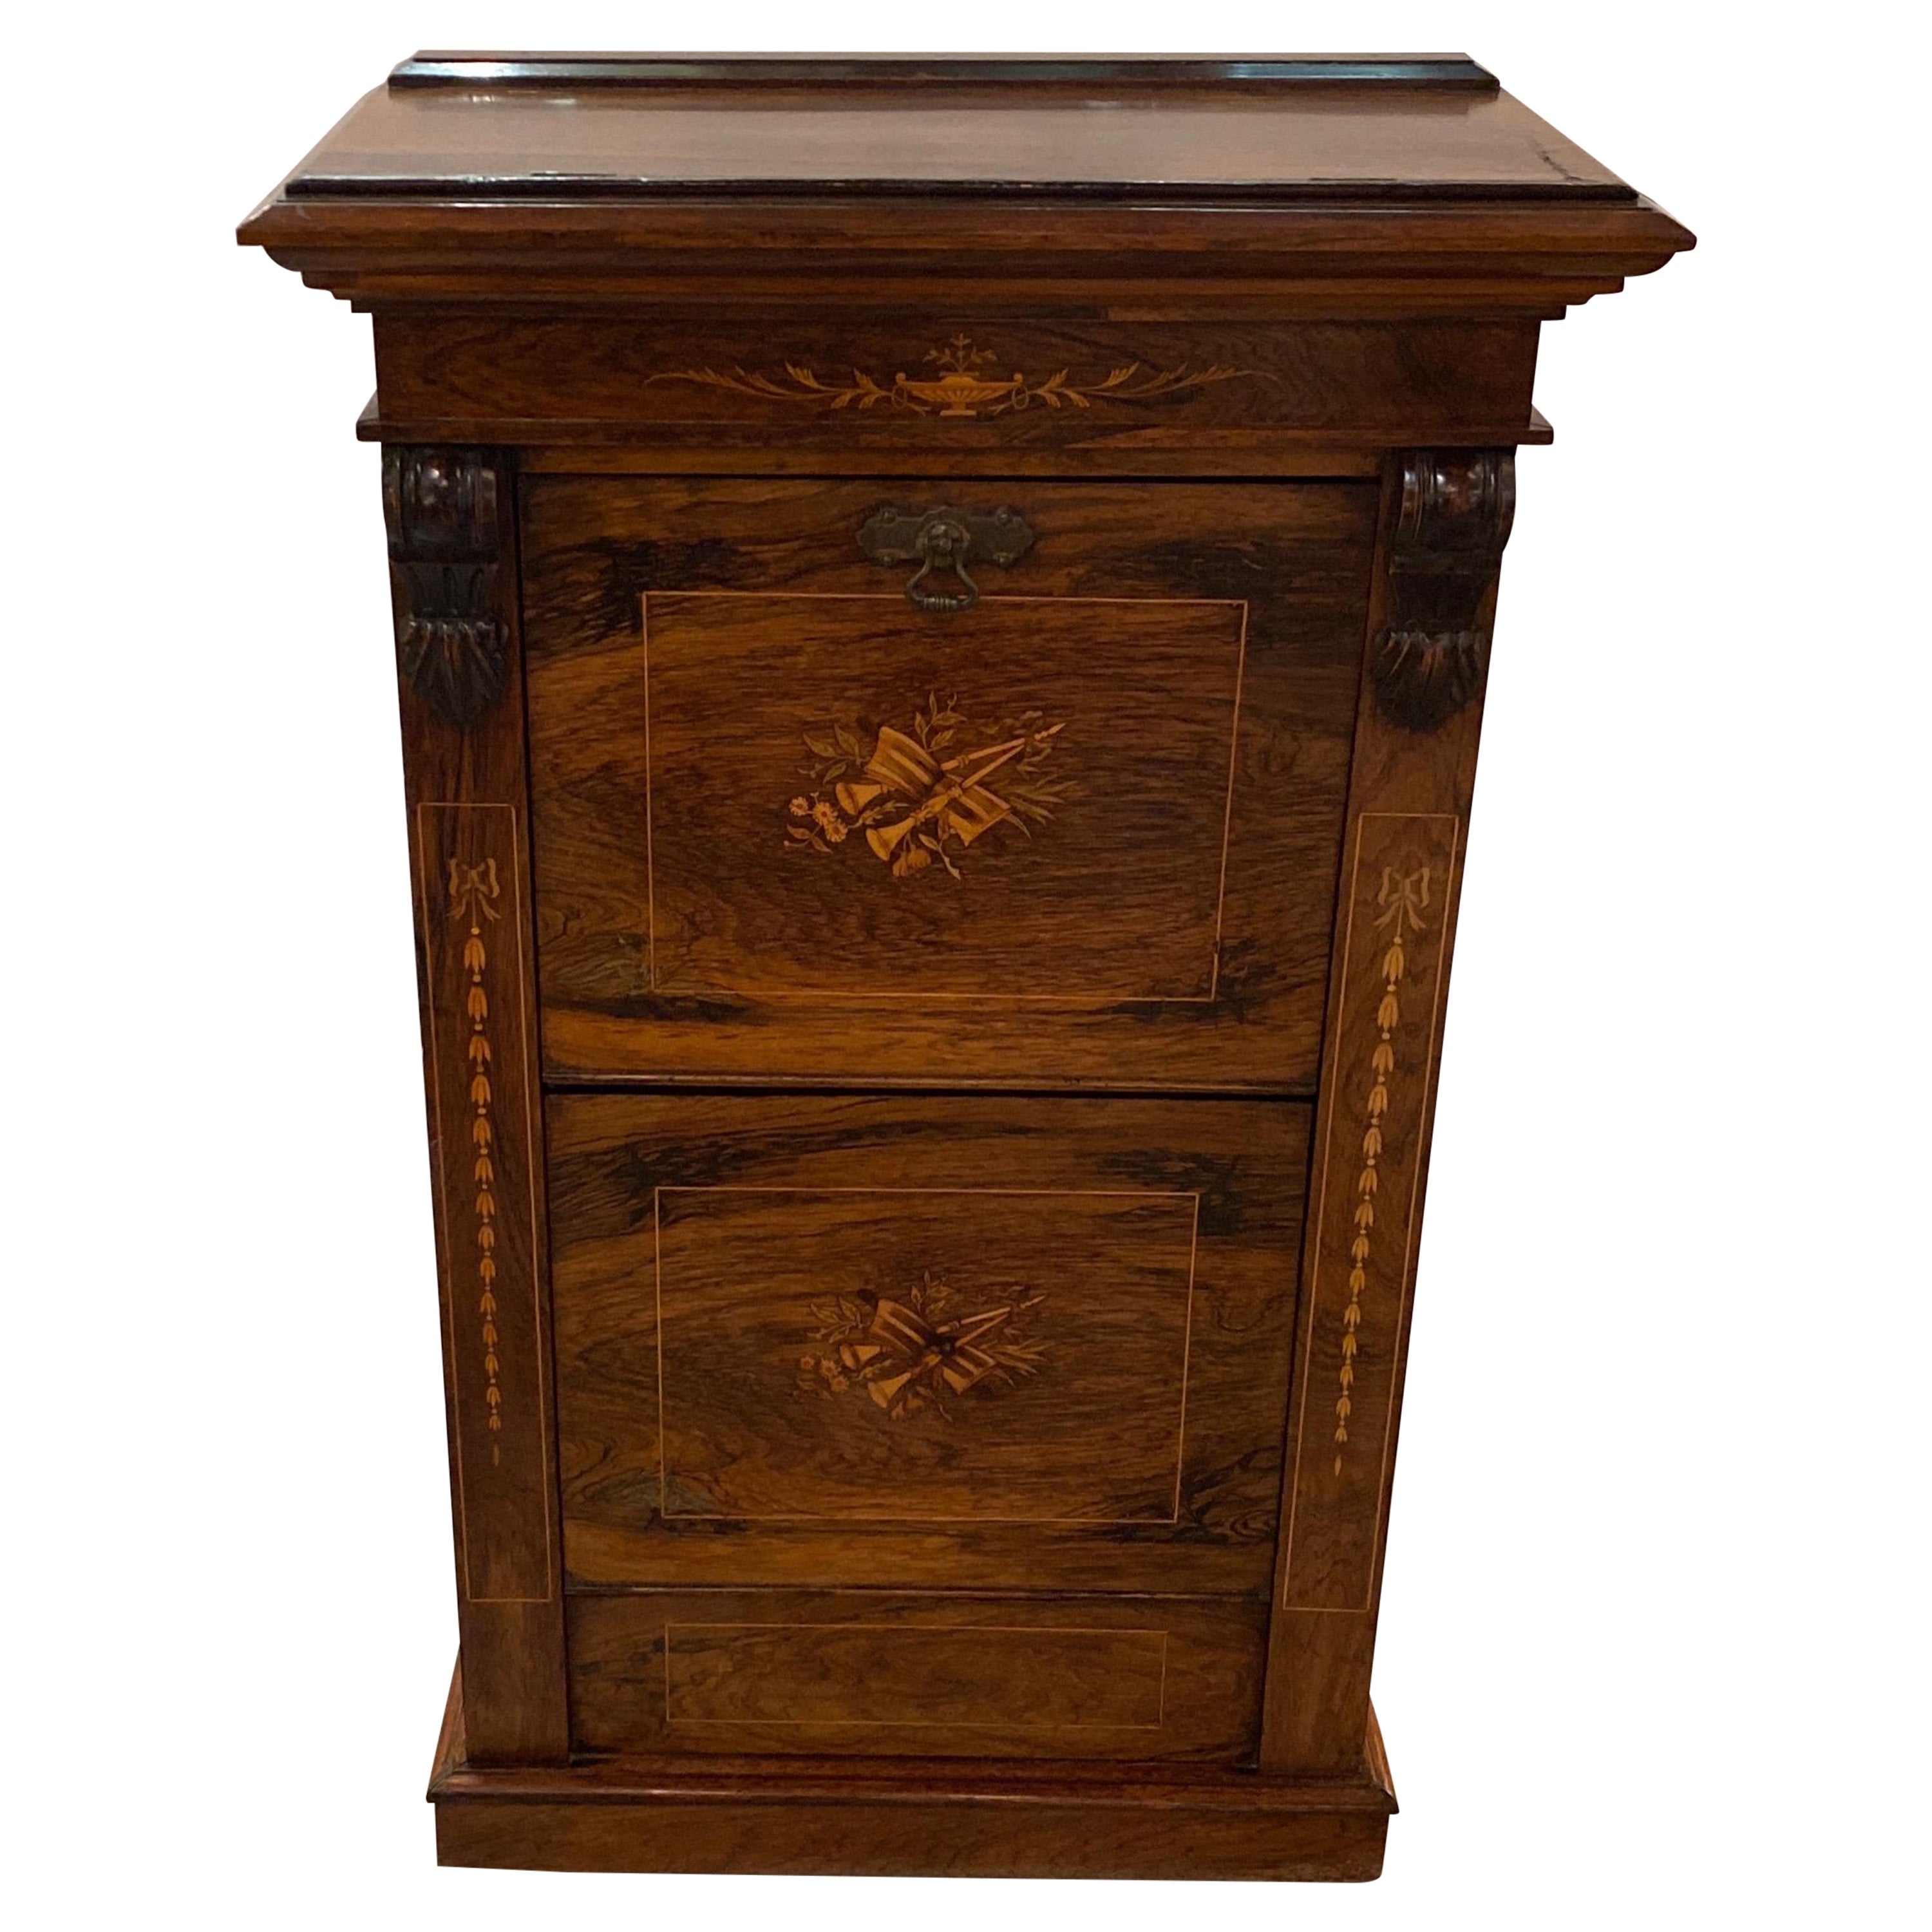 19th Century, Rosewood and Satinwood Inlaid Music Cabinet